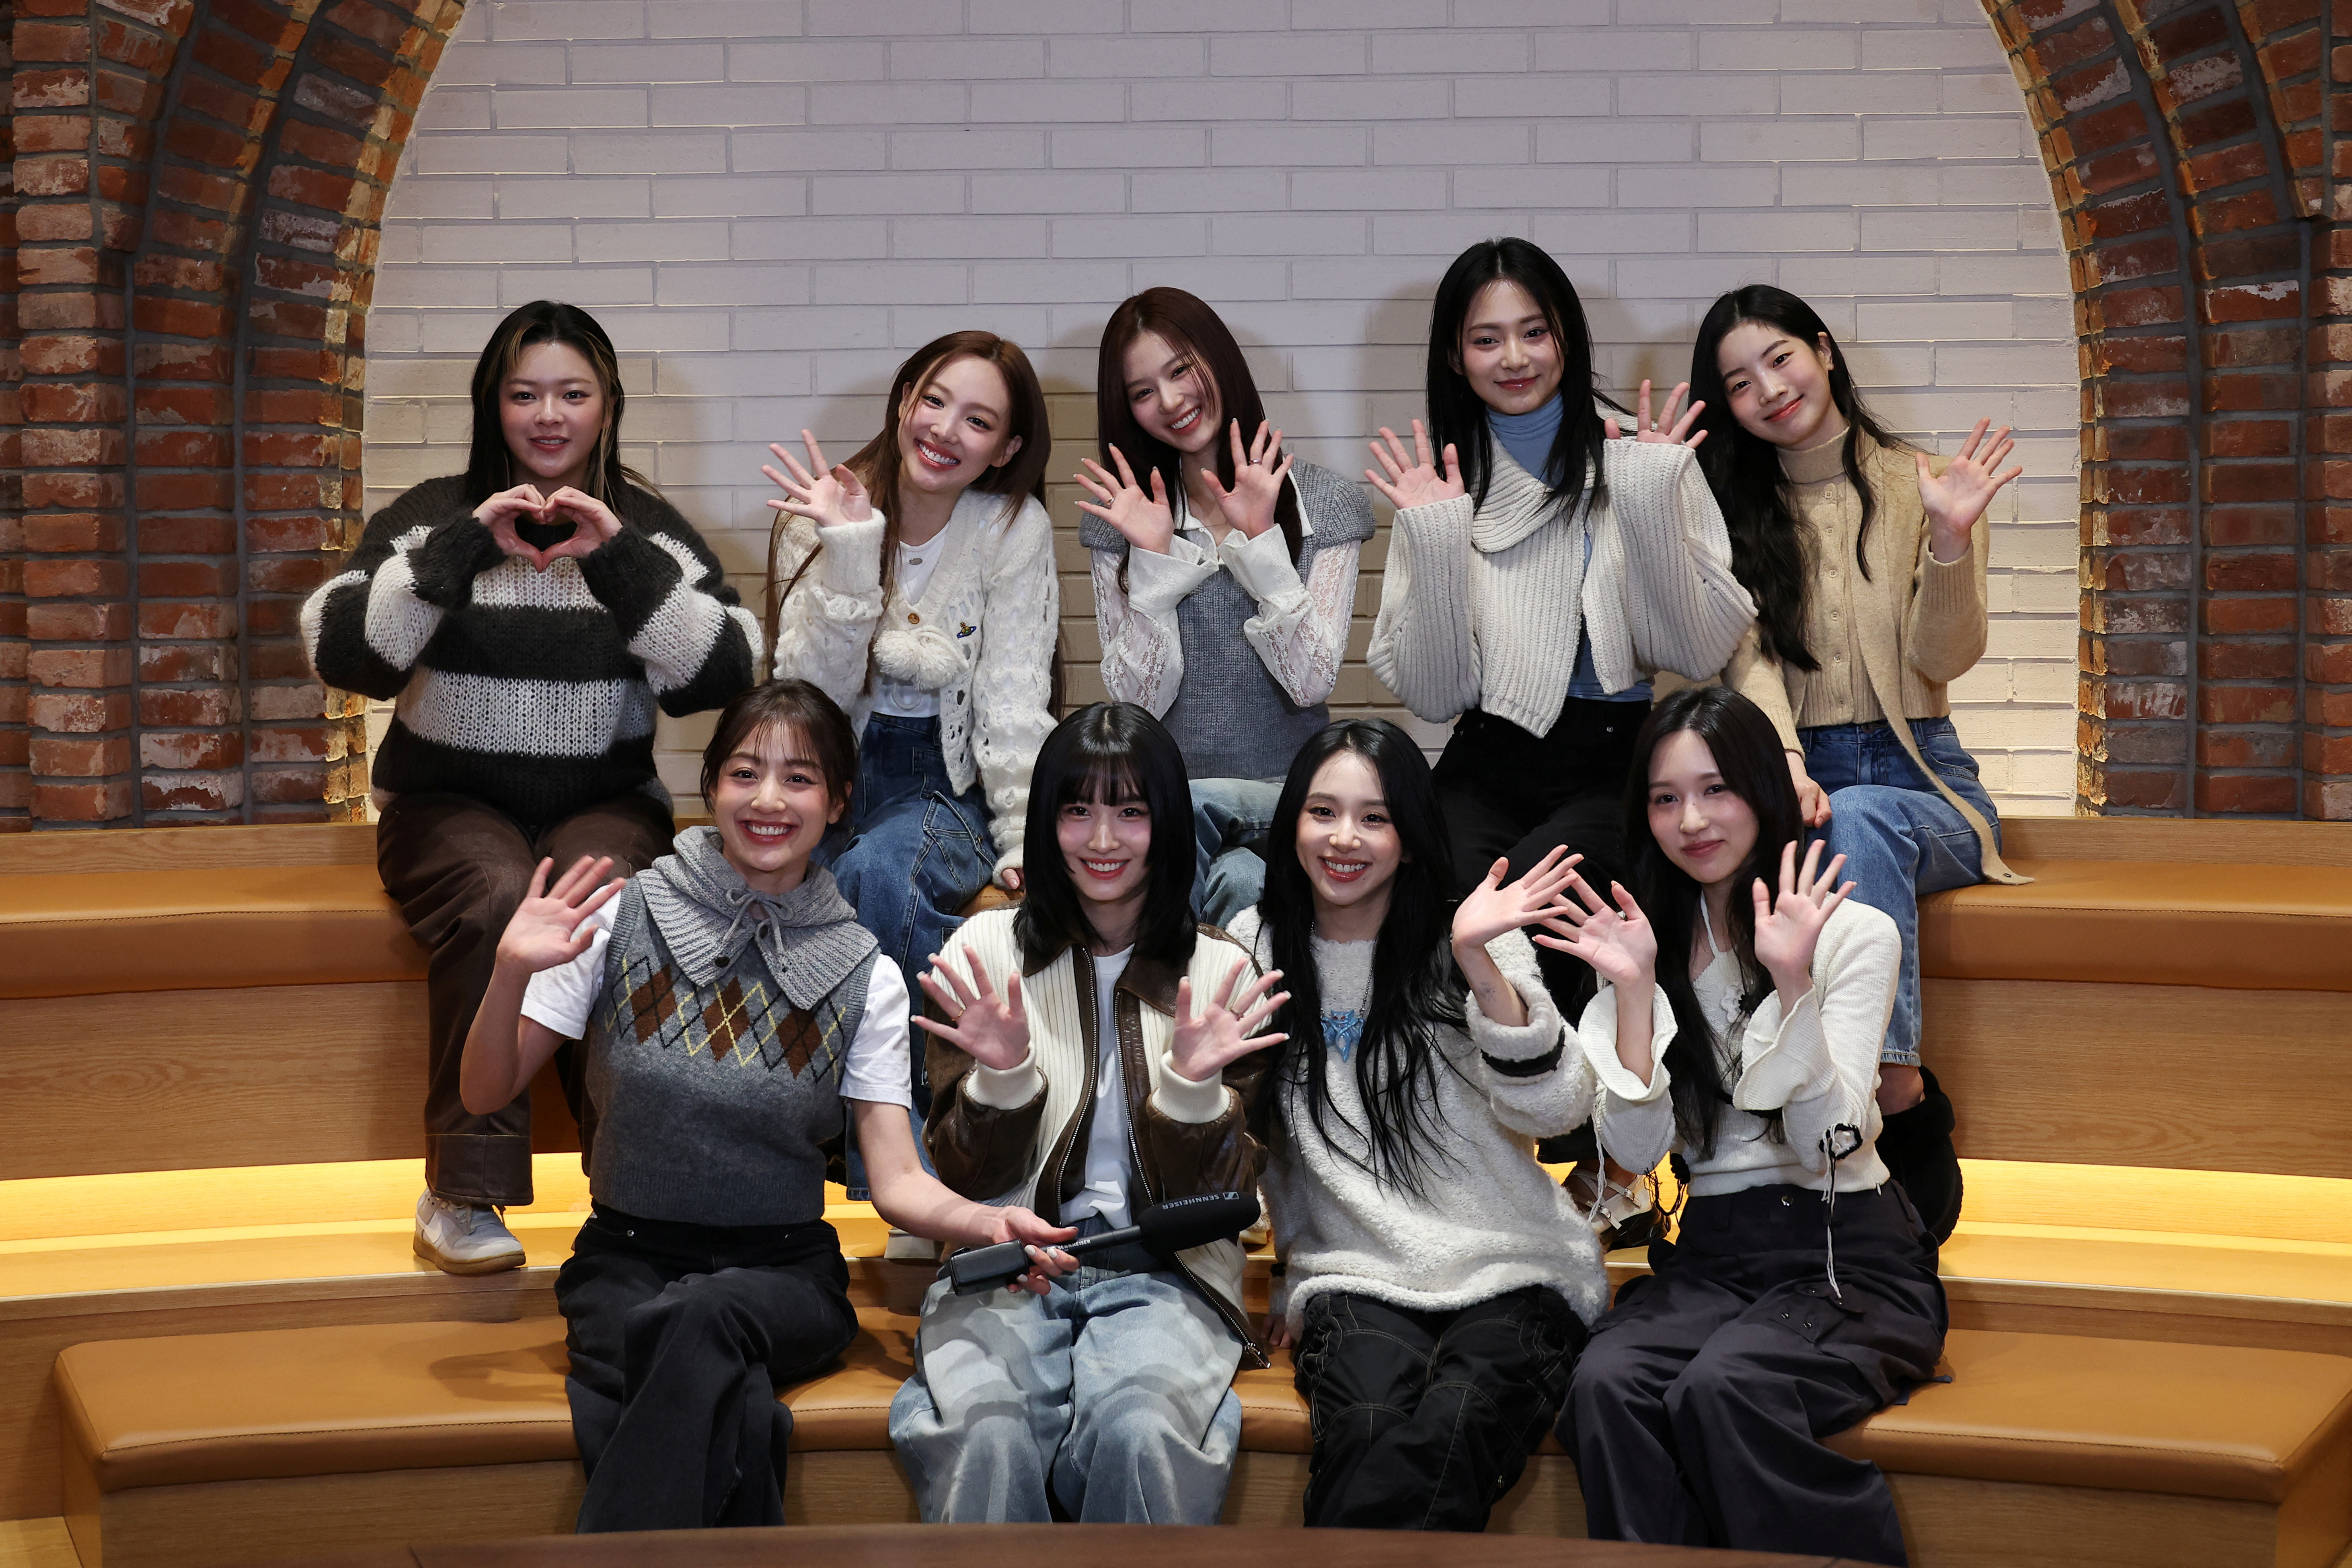 Interview with the K-pop girl group TWICE ahead of new album release